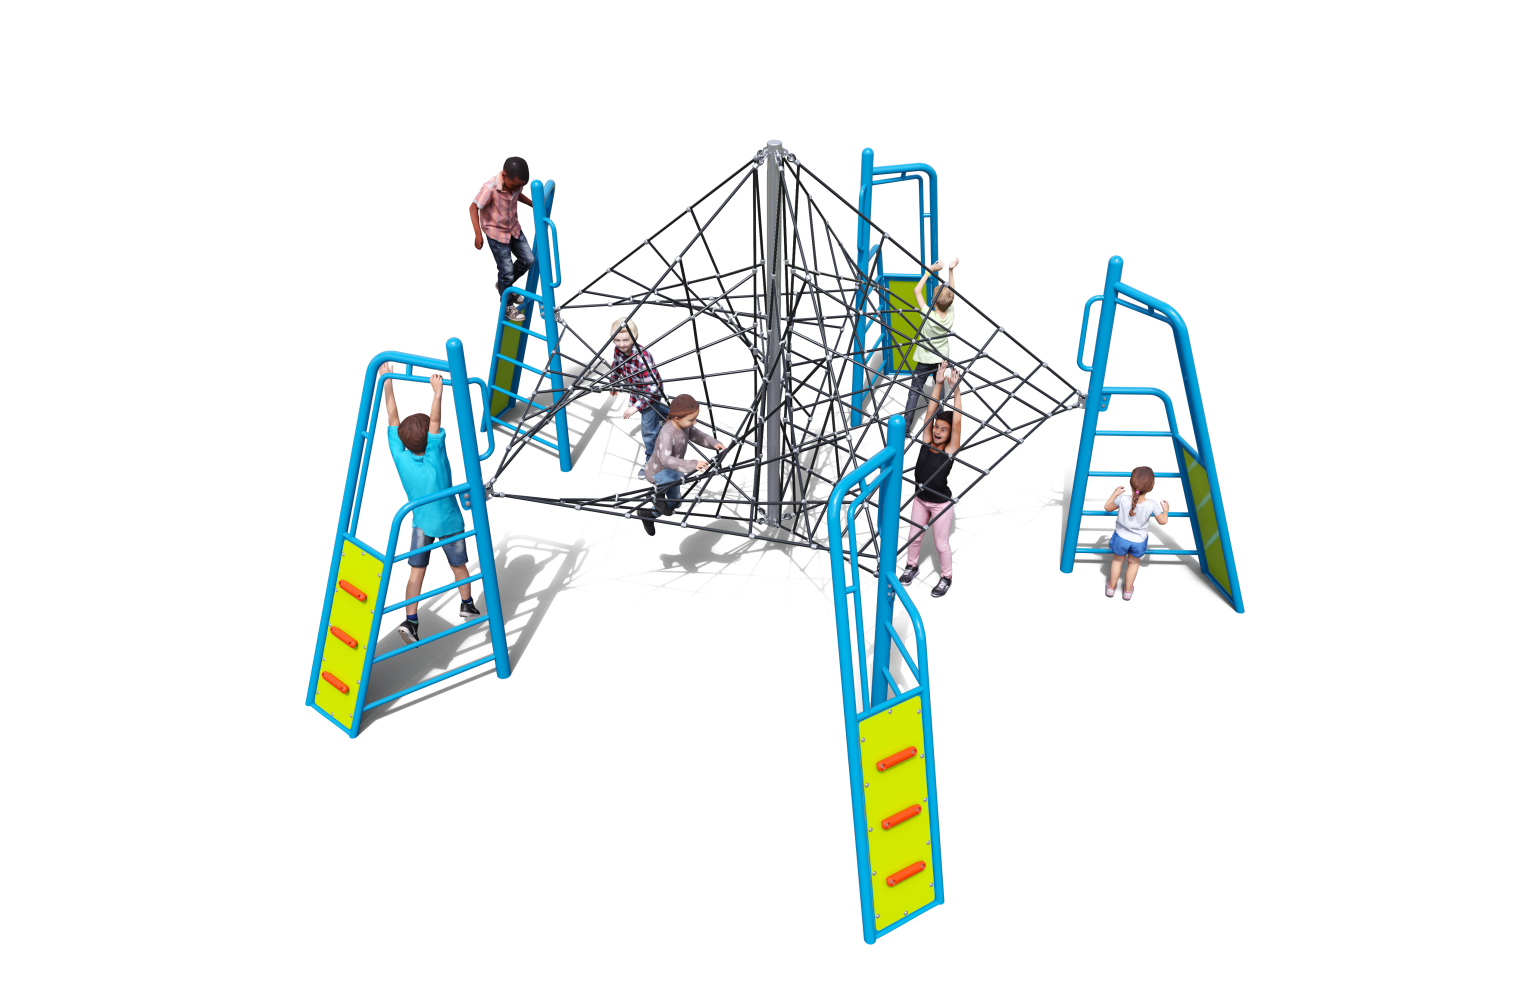 hover-net-4631-1-1536x994.png